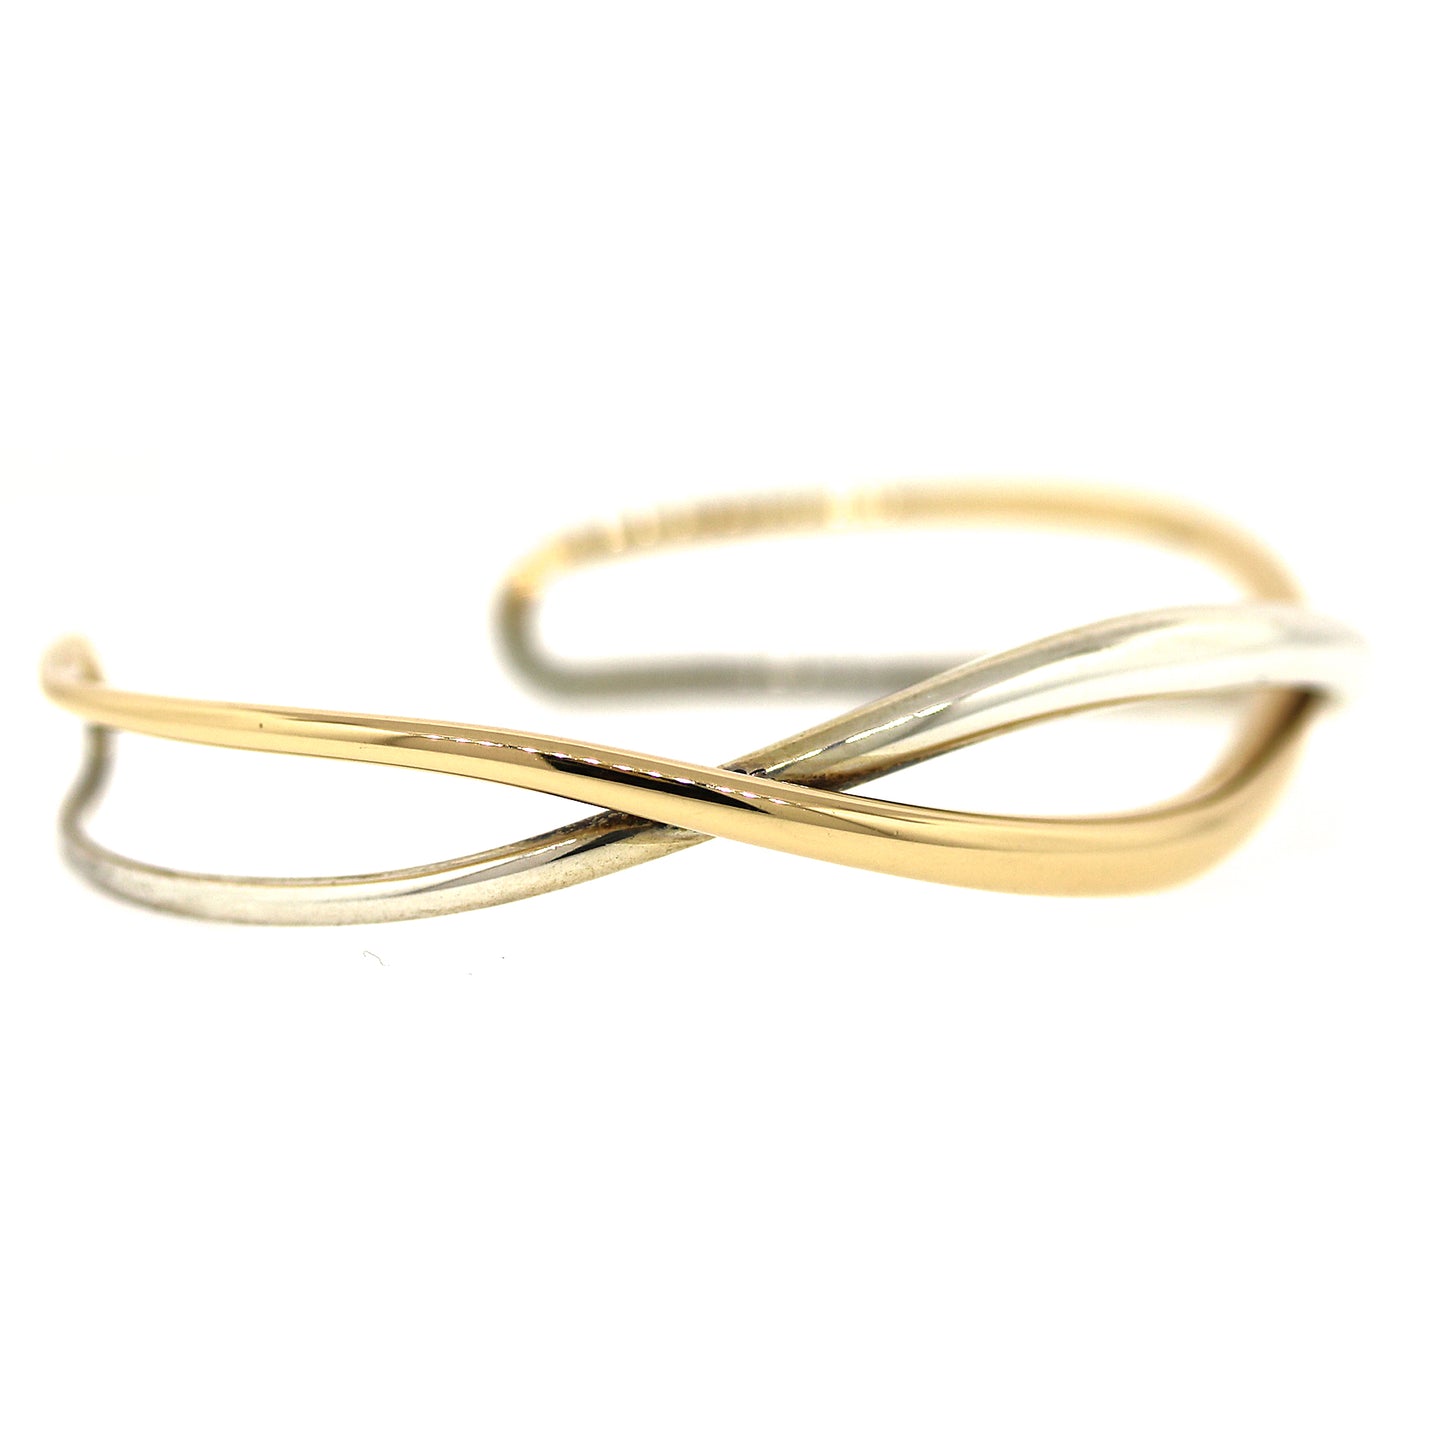 Preowned Ed Levin Wave Gold and Silver Bracelet